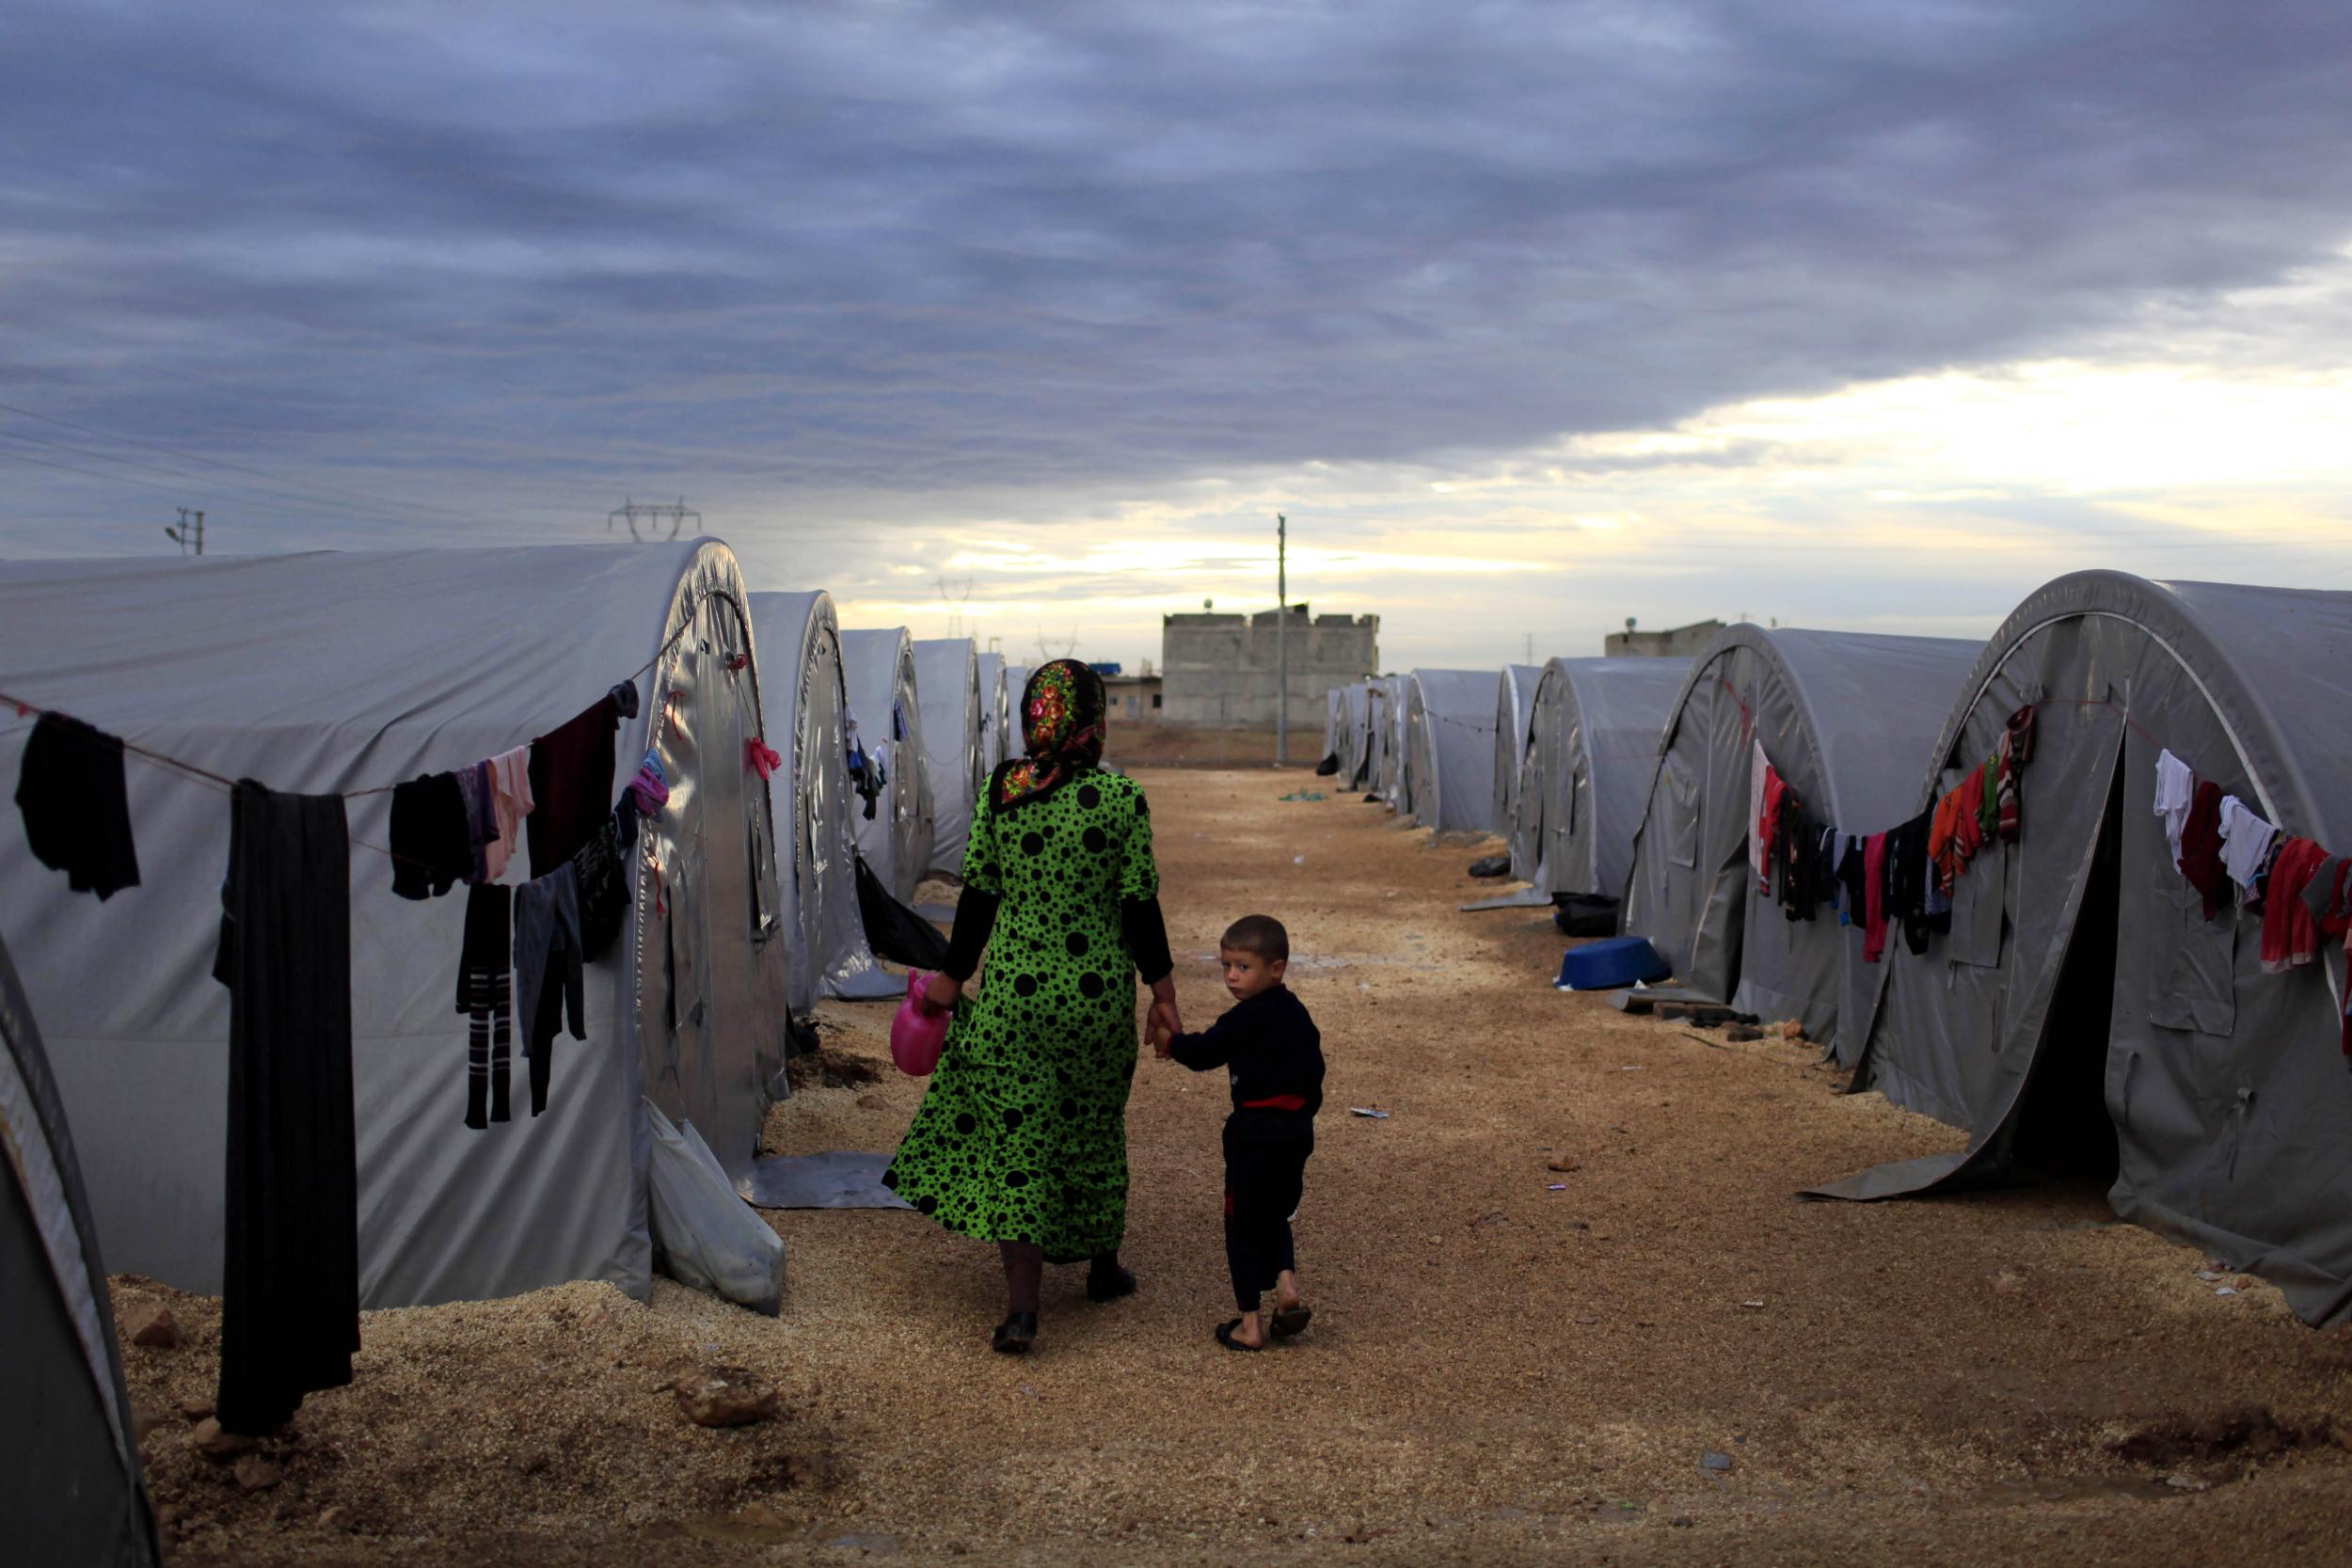 Turkey Has Stopped Registering Syrian Refugees Say Human Rights Group The Independent The